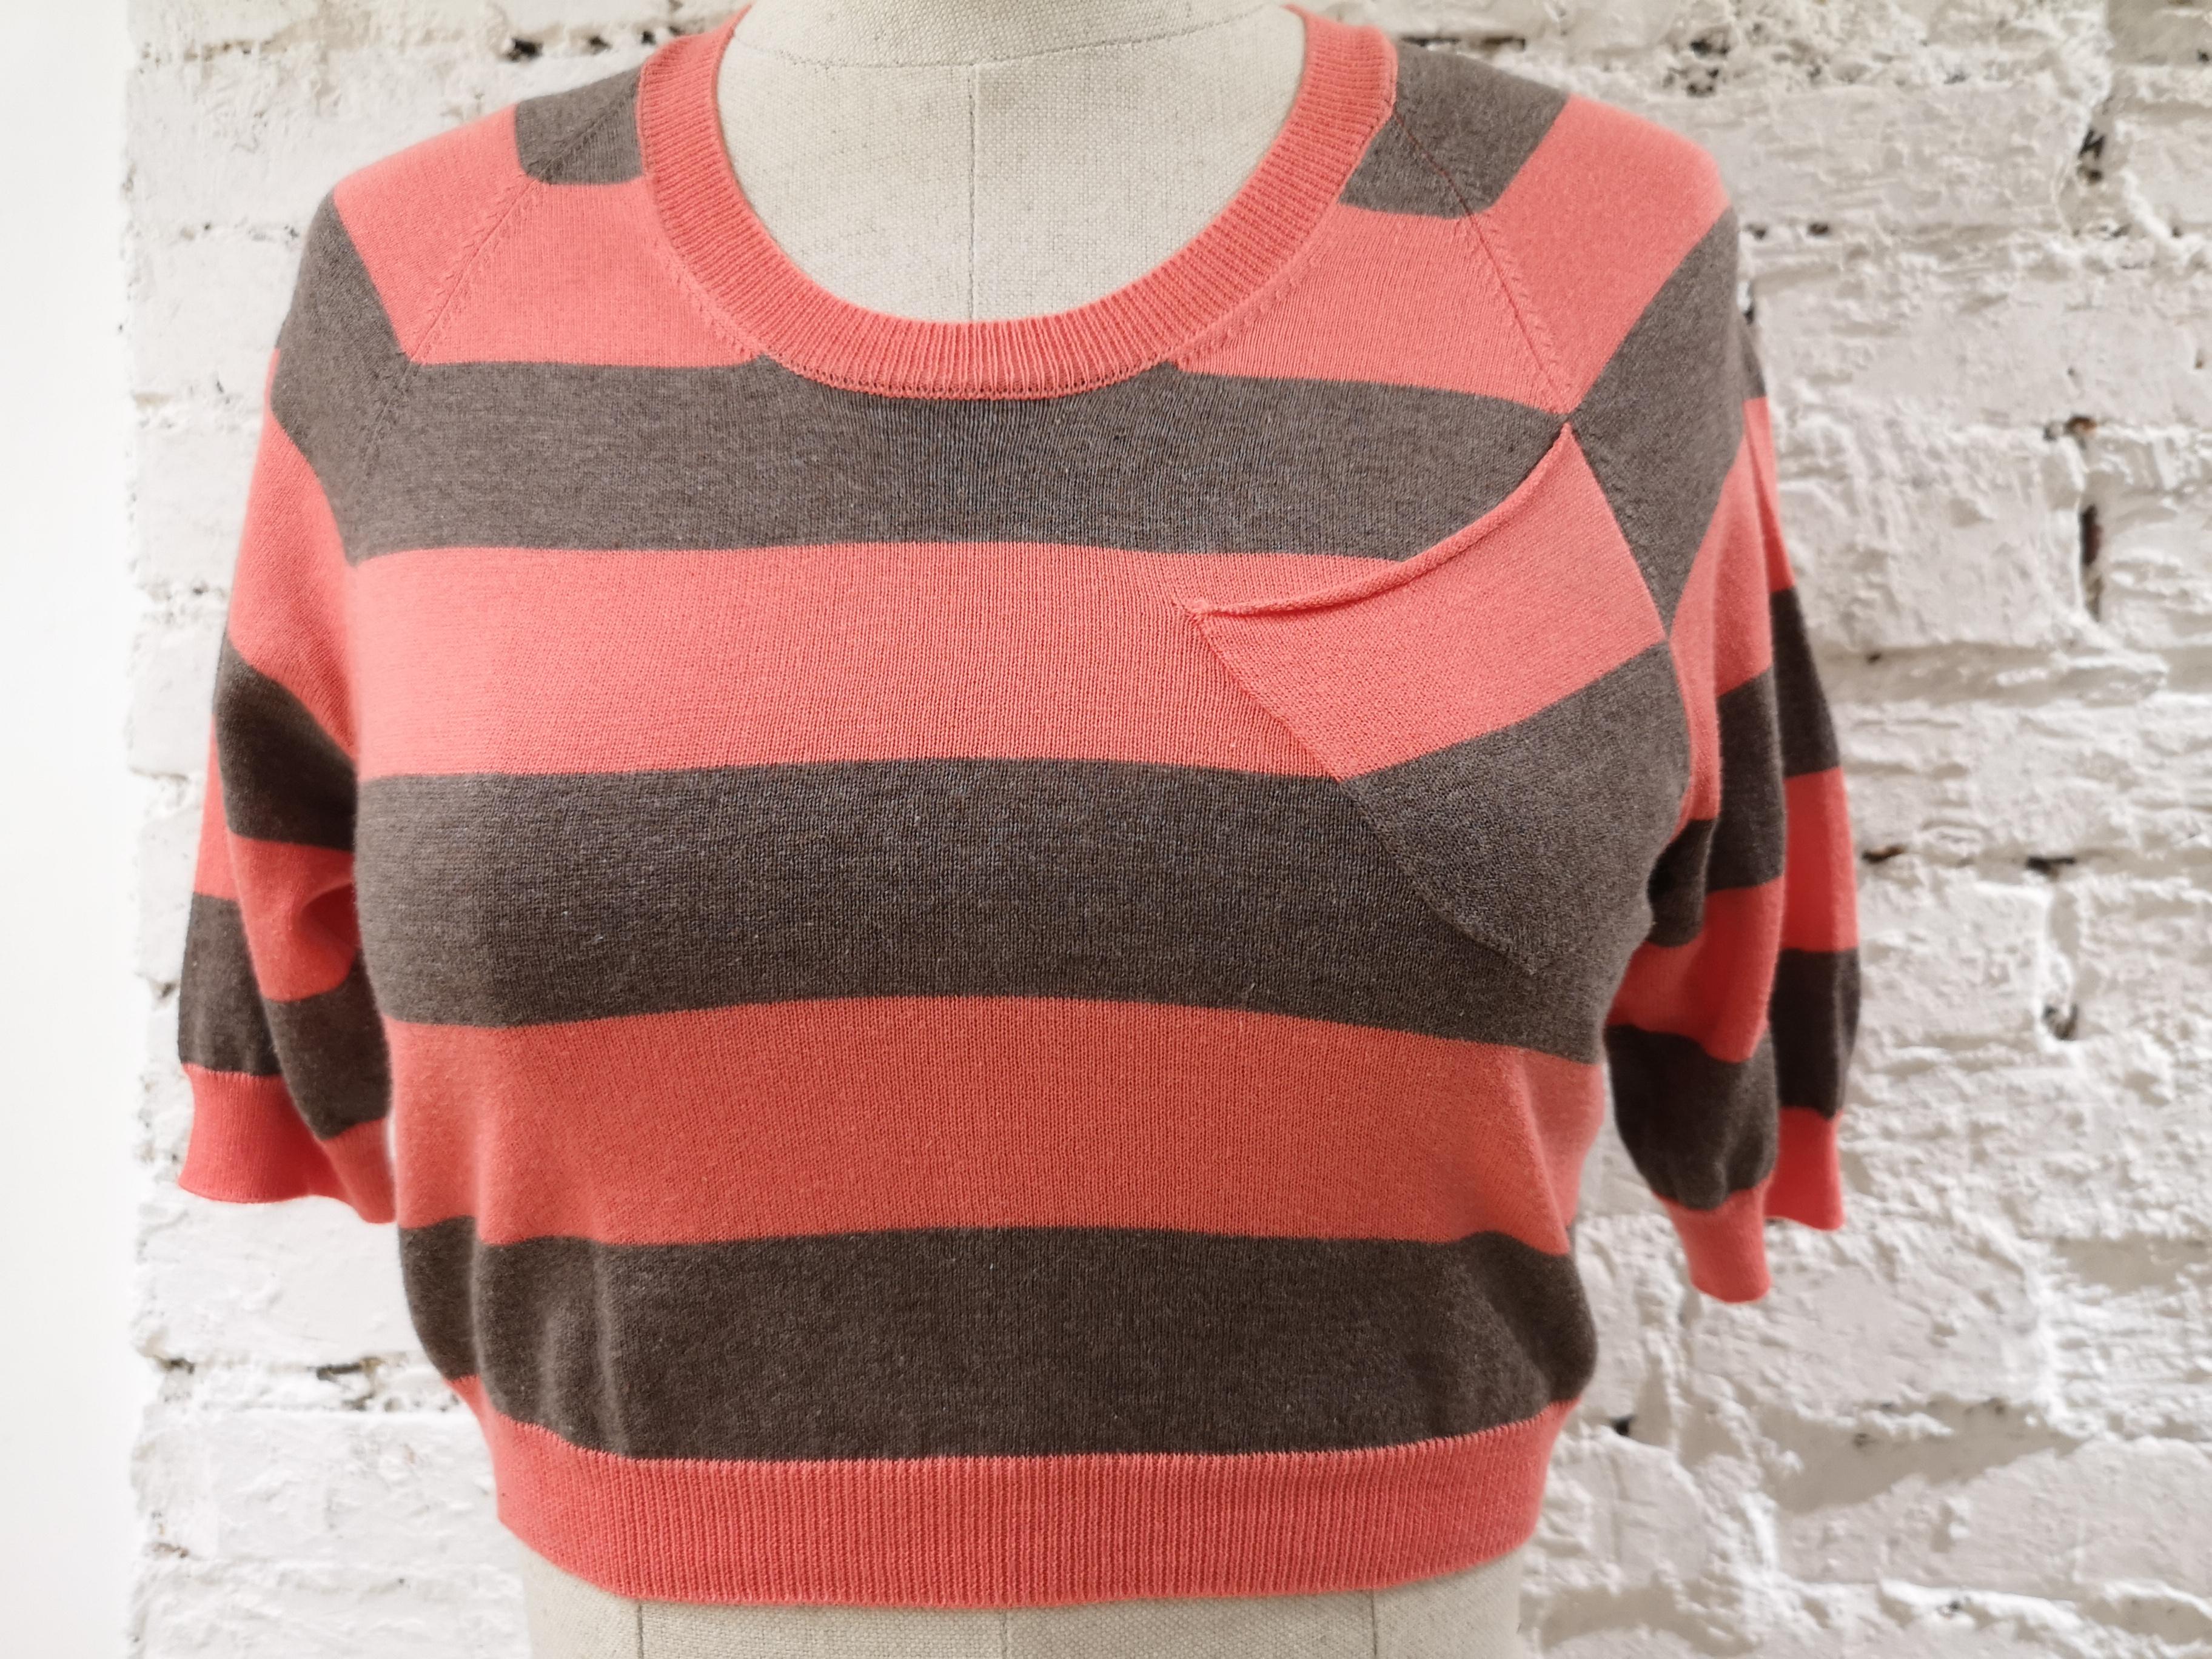 Mauro Grifoni pink brown sweater
totally made in italy in size M